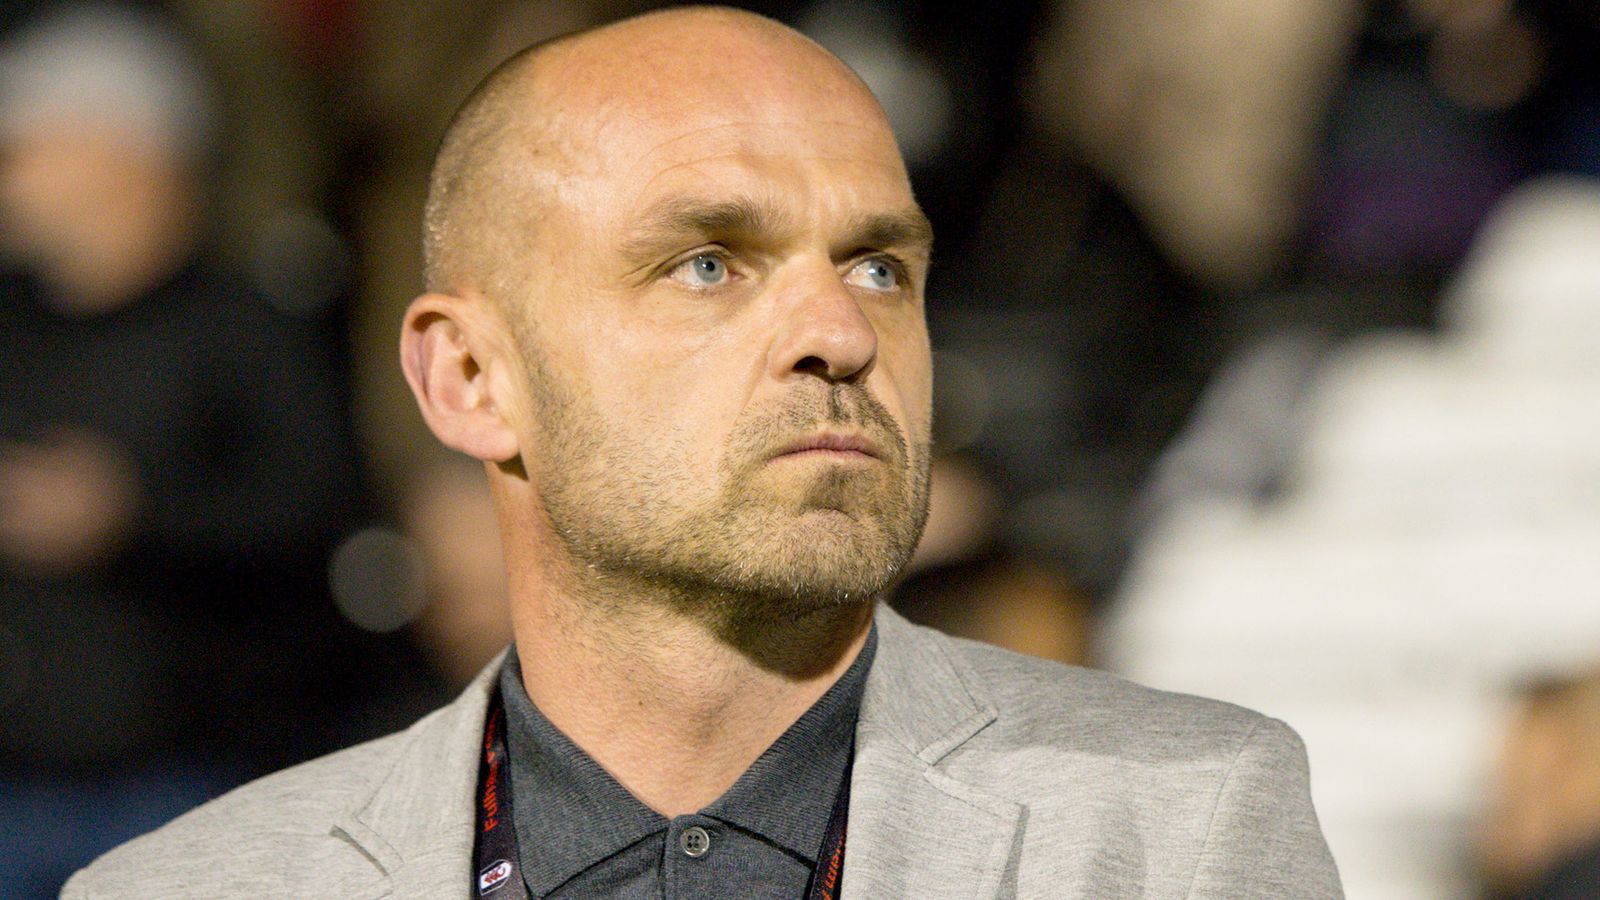 Danny Murphy opens up on cocaine addiction after retiring from football | UK News | Sky News